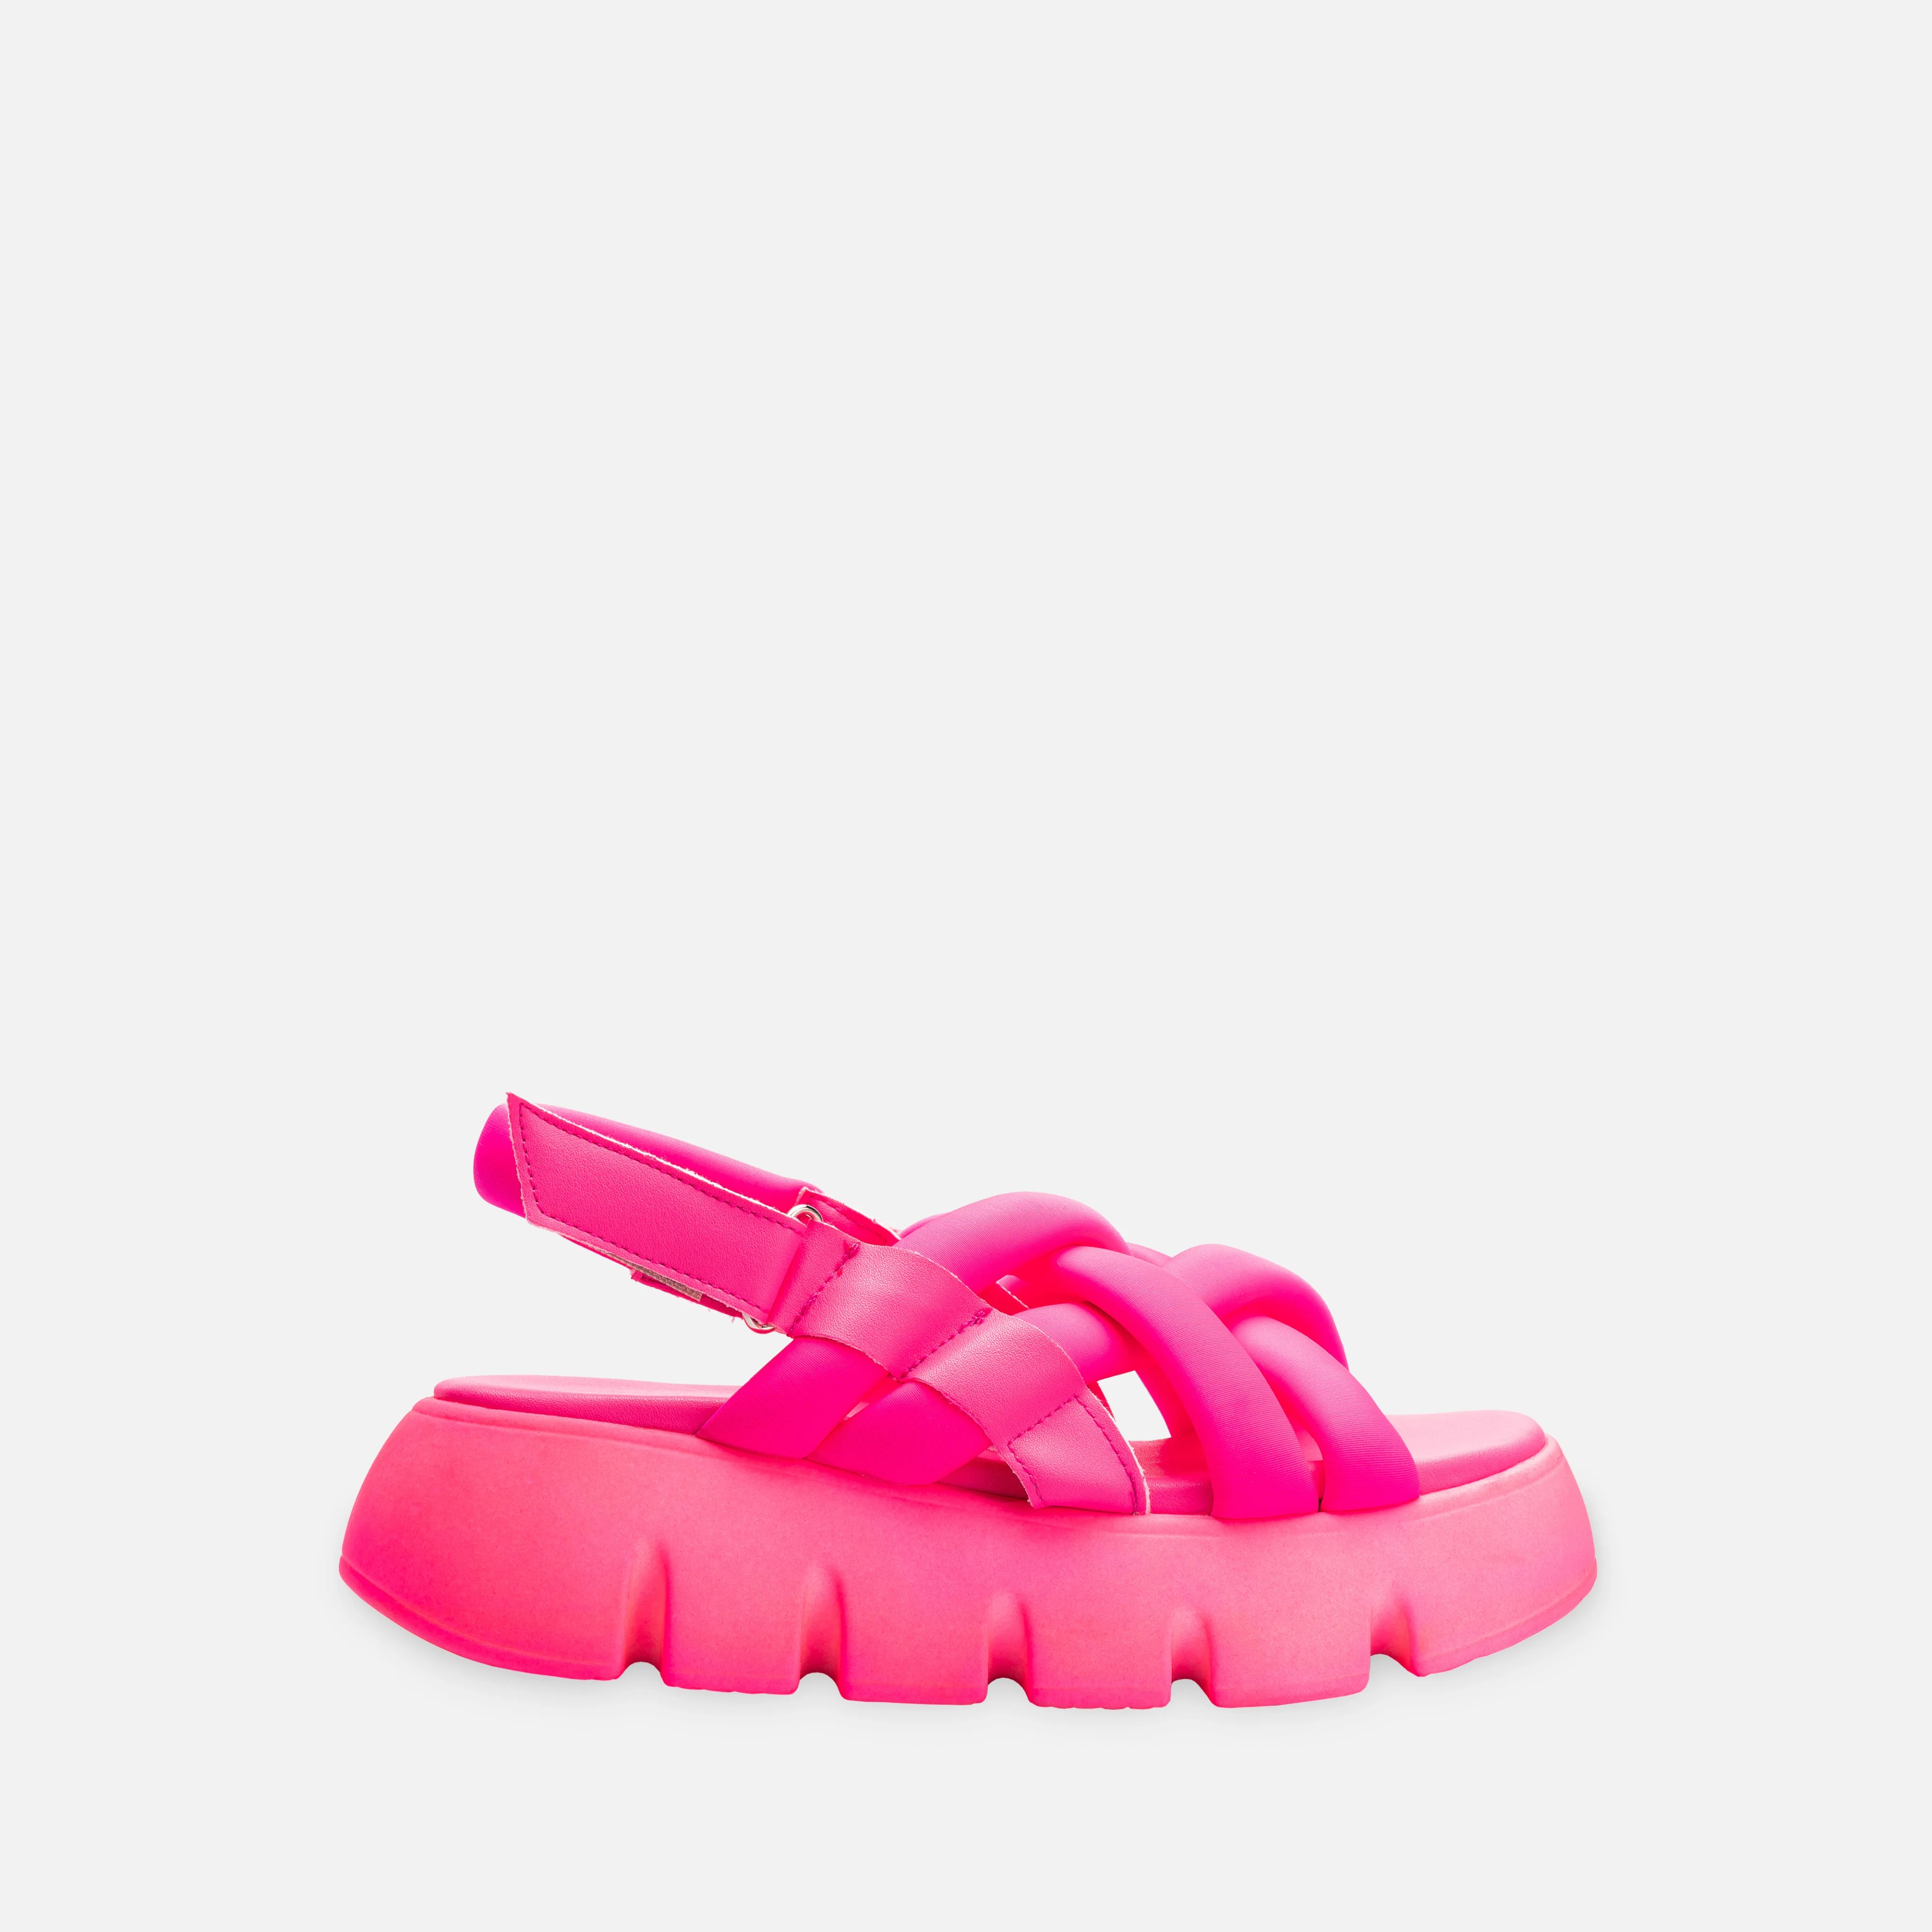 Neon Scuba Fabric Thick Comfortable Sole Sandals - Pink